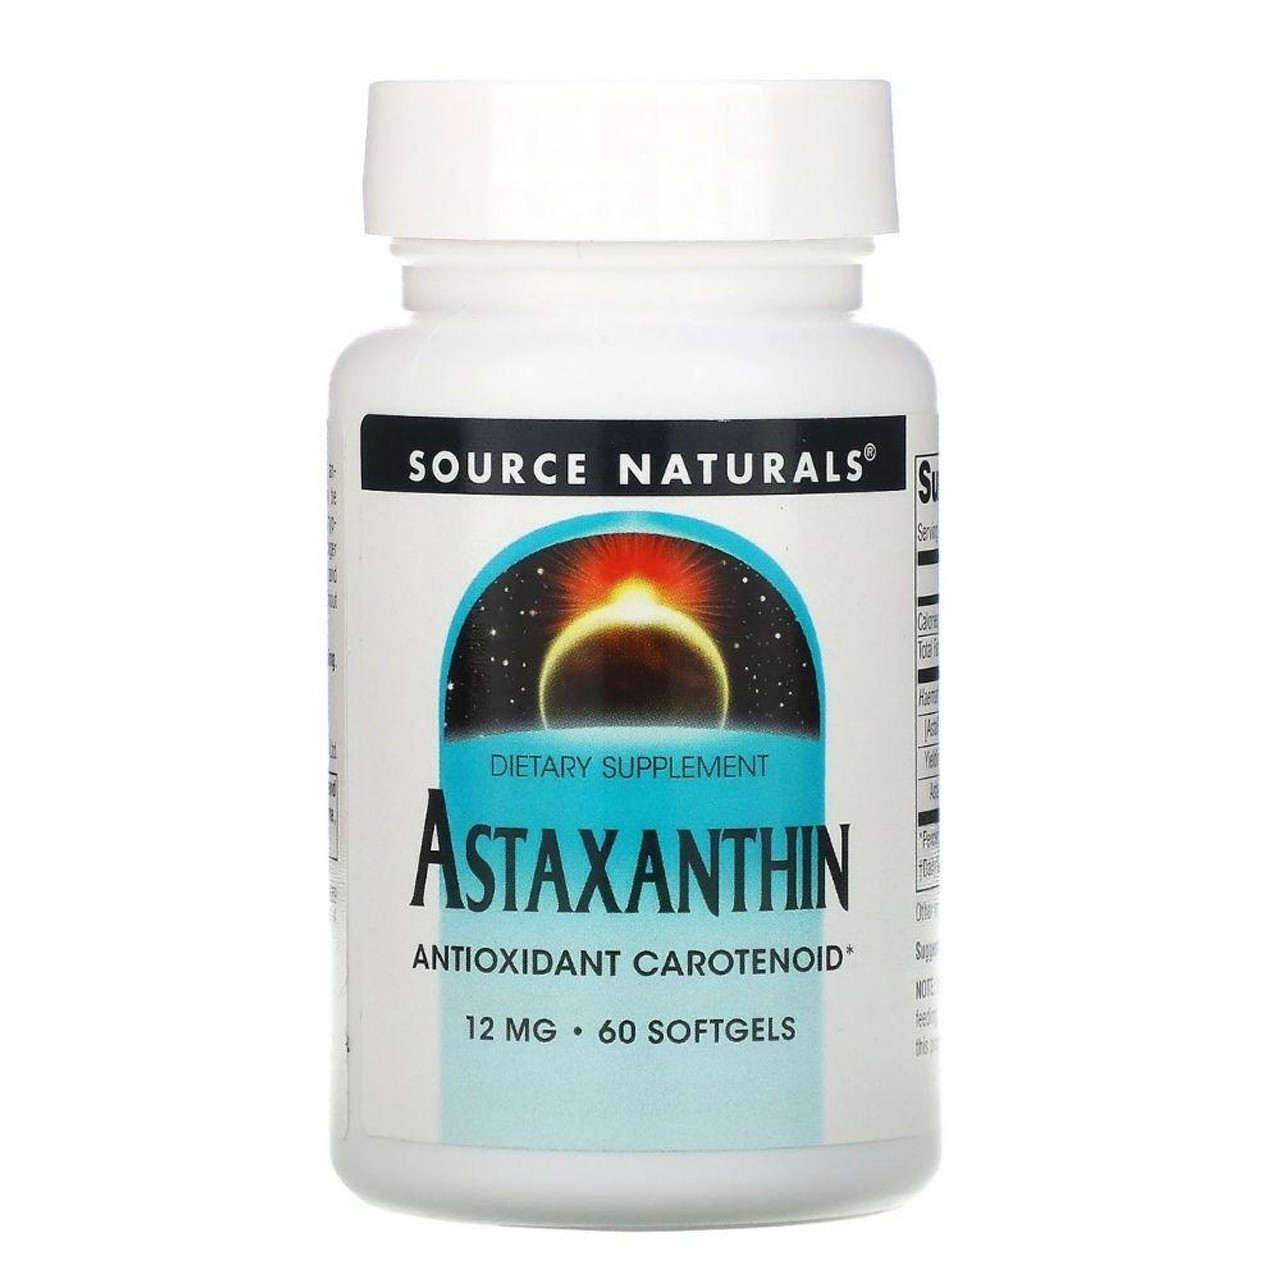 Source Naturals Astaxanthin 12mg 60 Softgels Best Price Nutrition Retail Store 